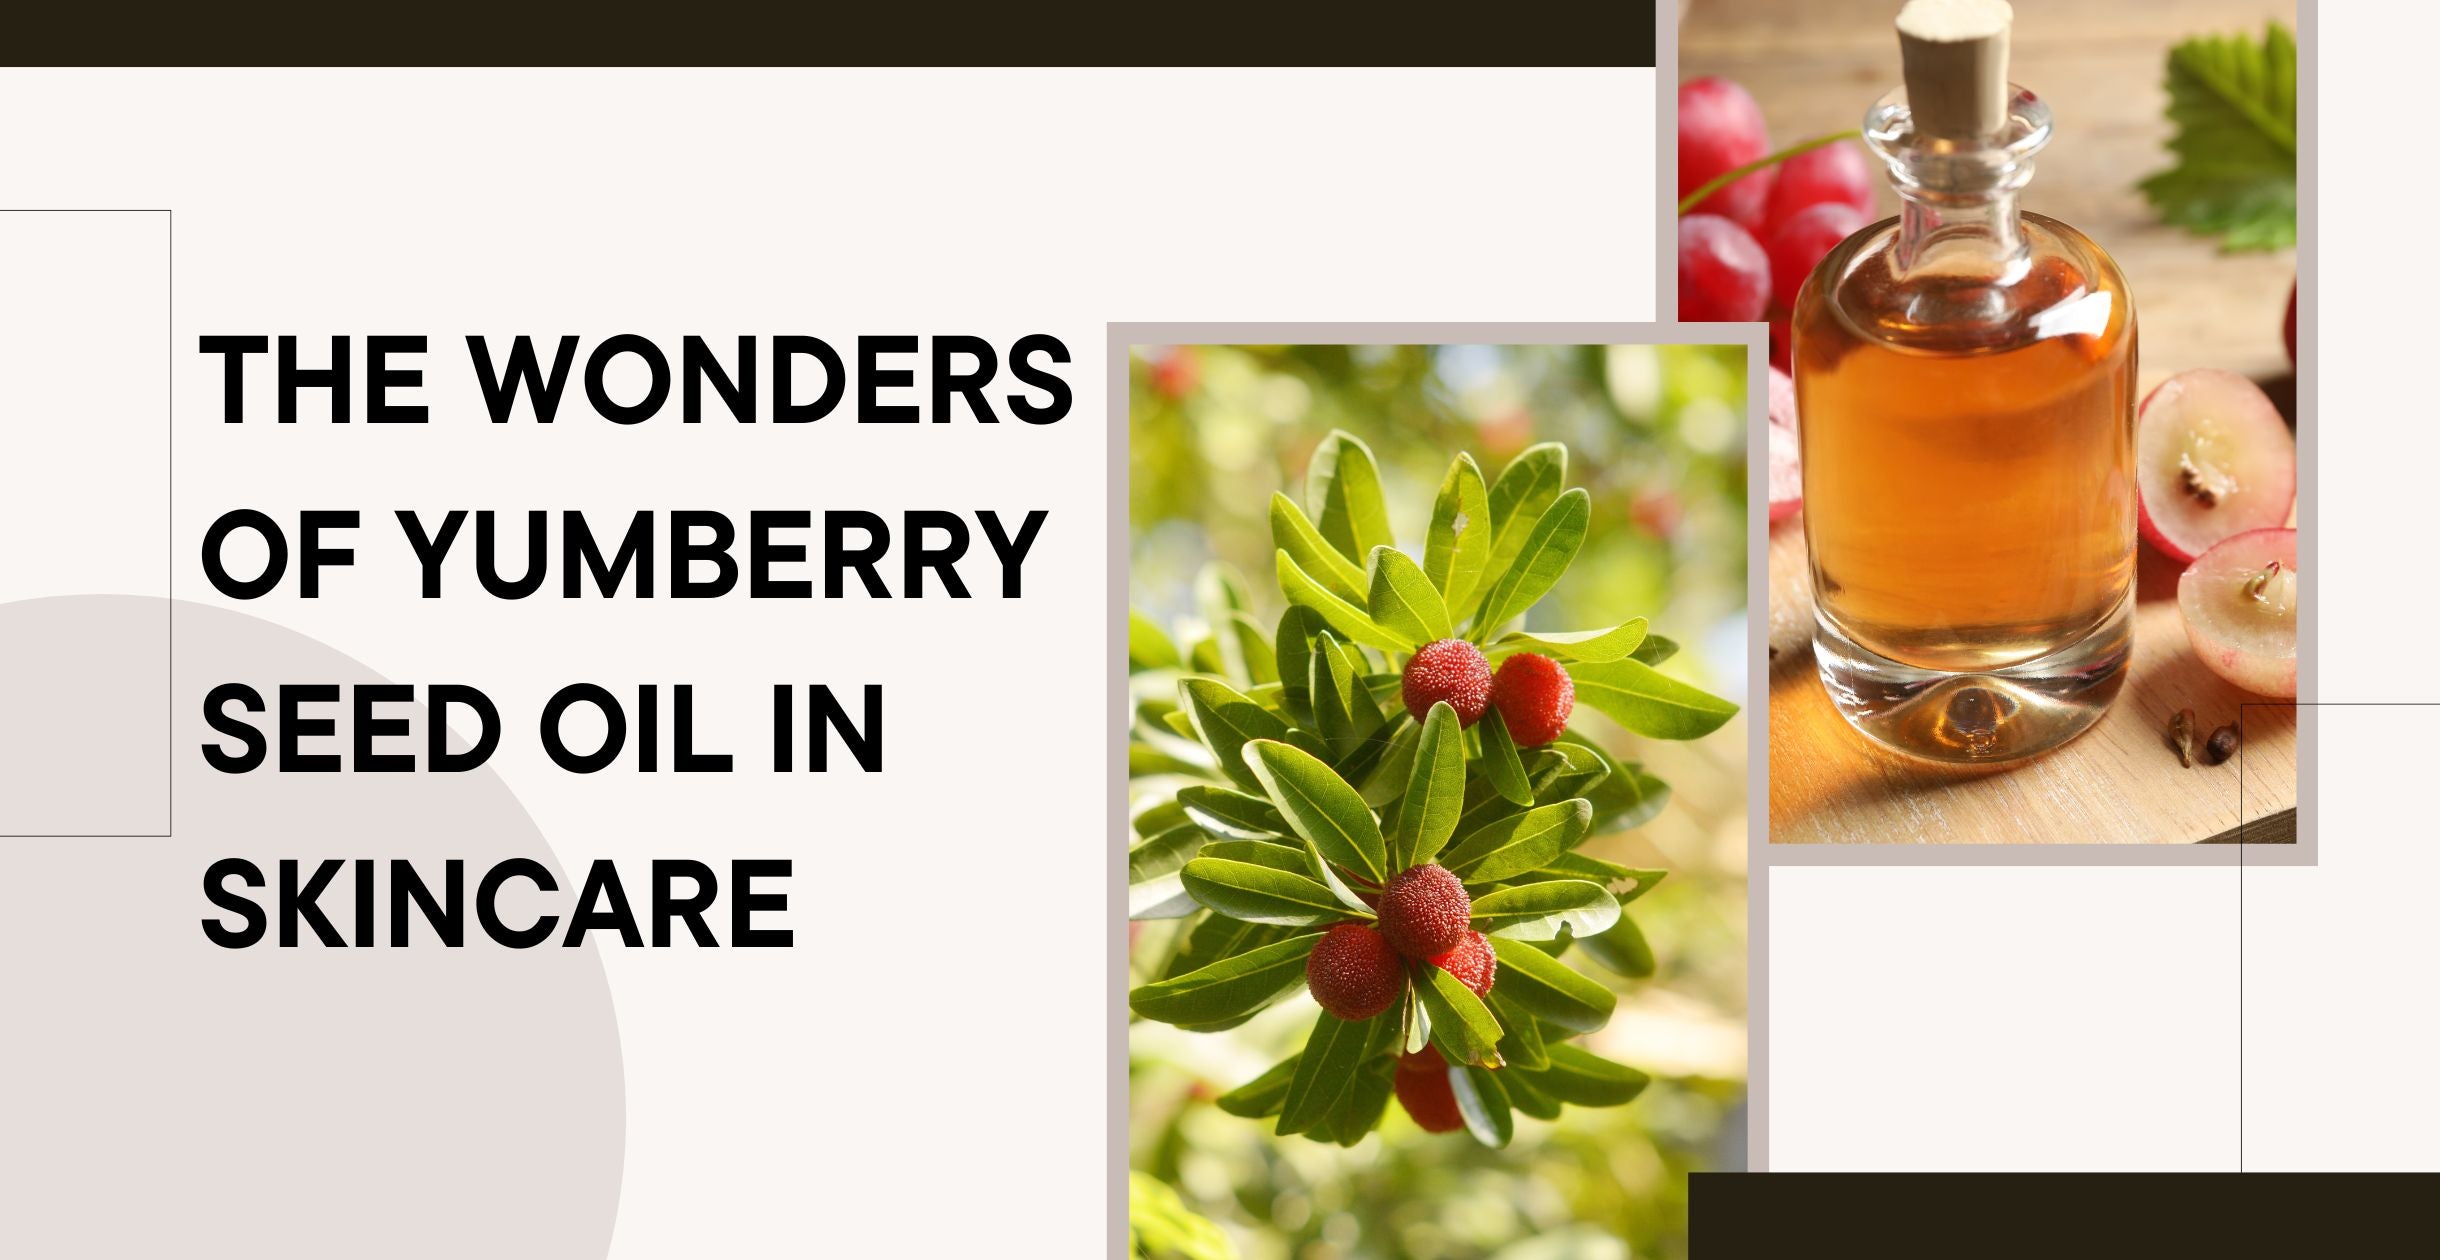 The Wonders of Yumberry Seed Oil in Skincare